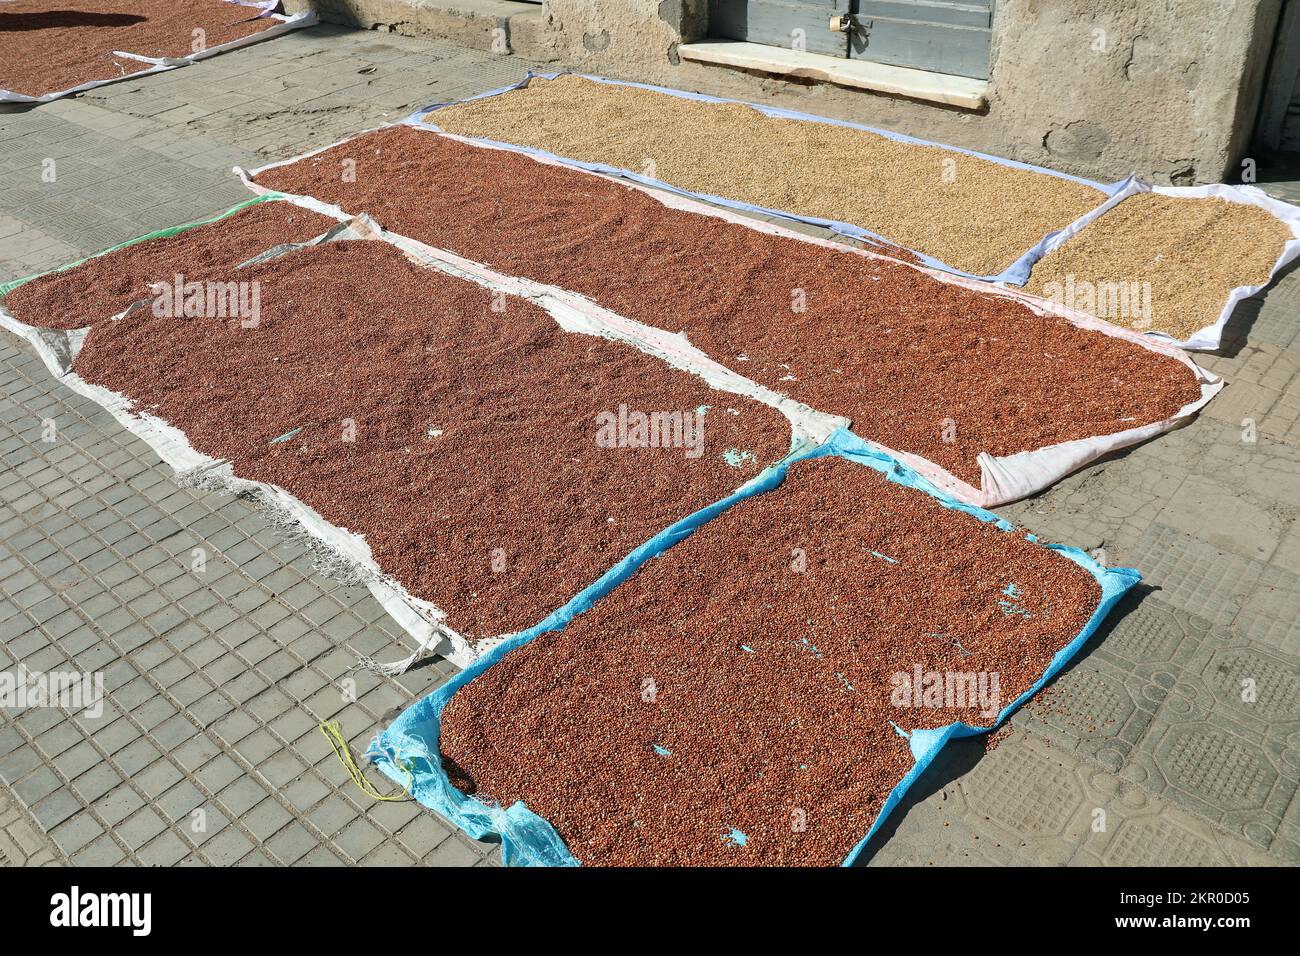 Teff seeds which are used to make injera drying on the pavement in Asmara Stock Photo